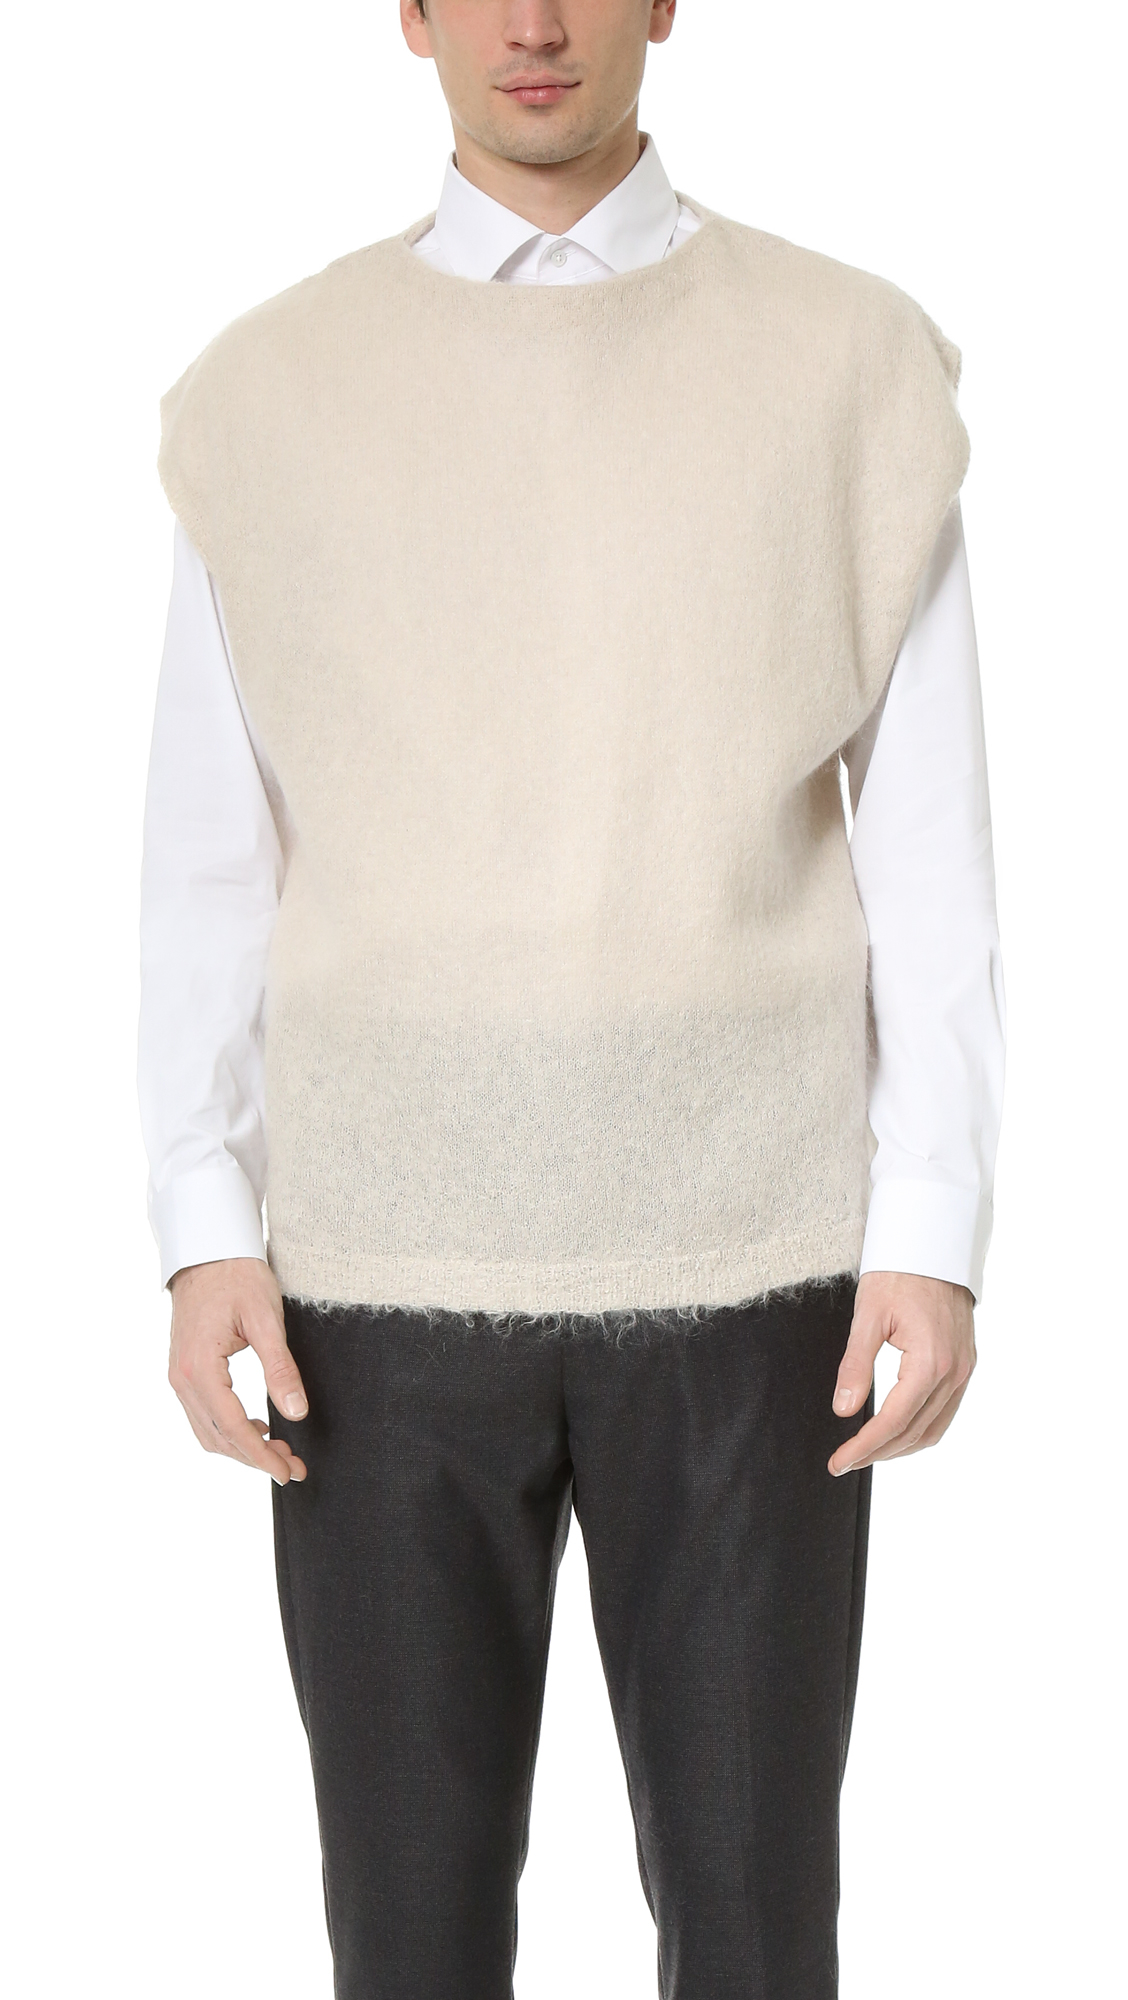 Lyst - Marni Mohair Sleeveless Sweater in Natural for Men